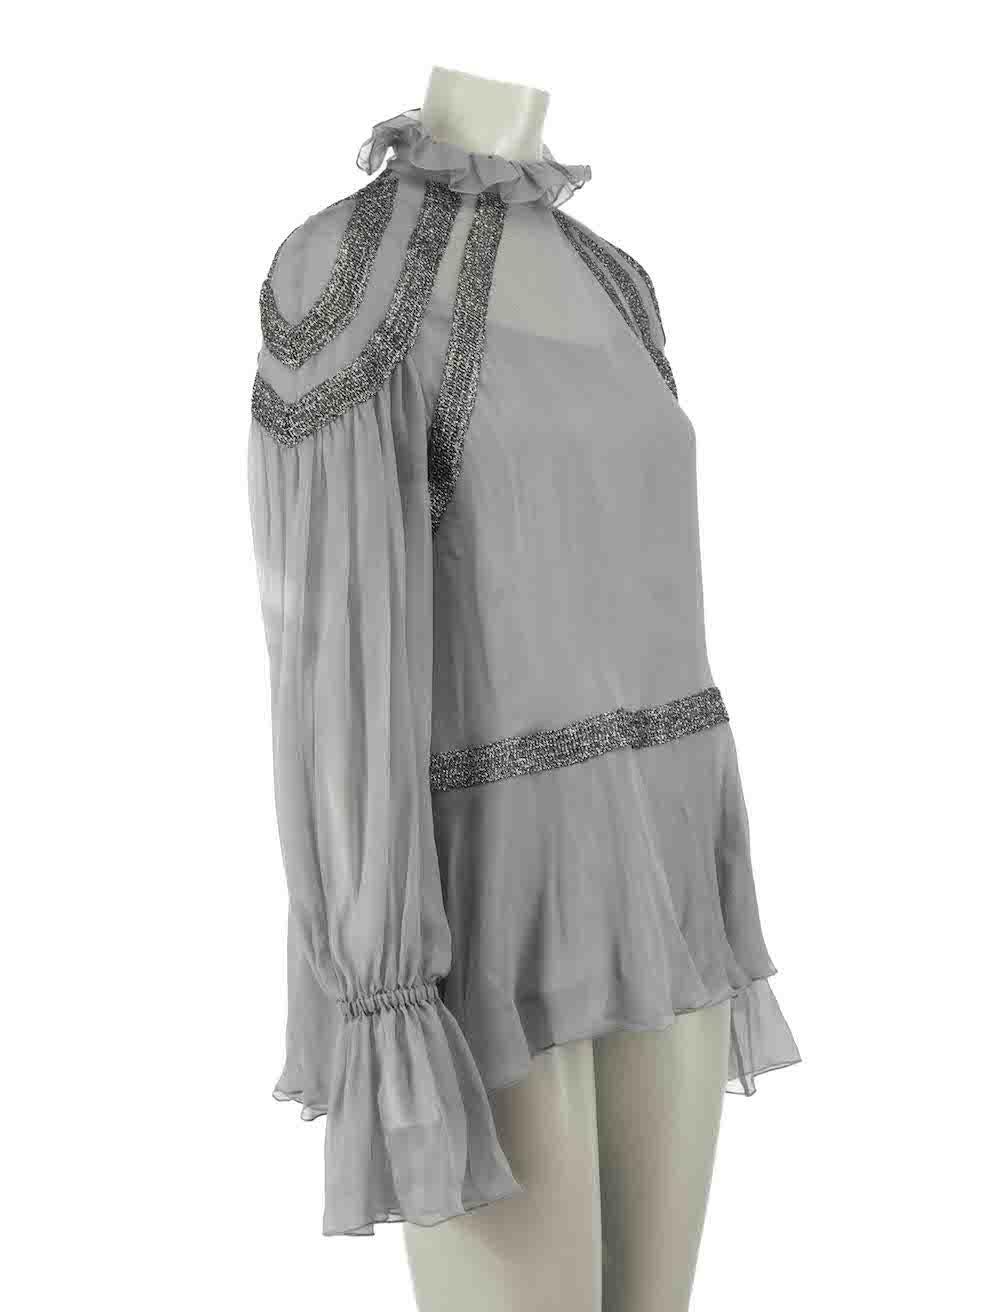 CONDITION is Very good. Minimal wear to blouse is evident. Minimal wear to the right sleeve with small hole and pull to the weave on this used Alberta Ferretti designer resale item.

Details
Grey
Silk
Long sleeves blouse
Sheer
Glitter